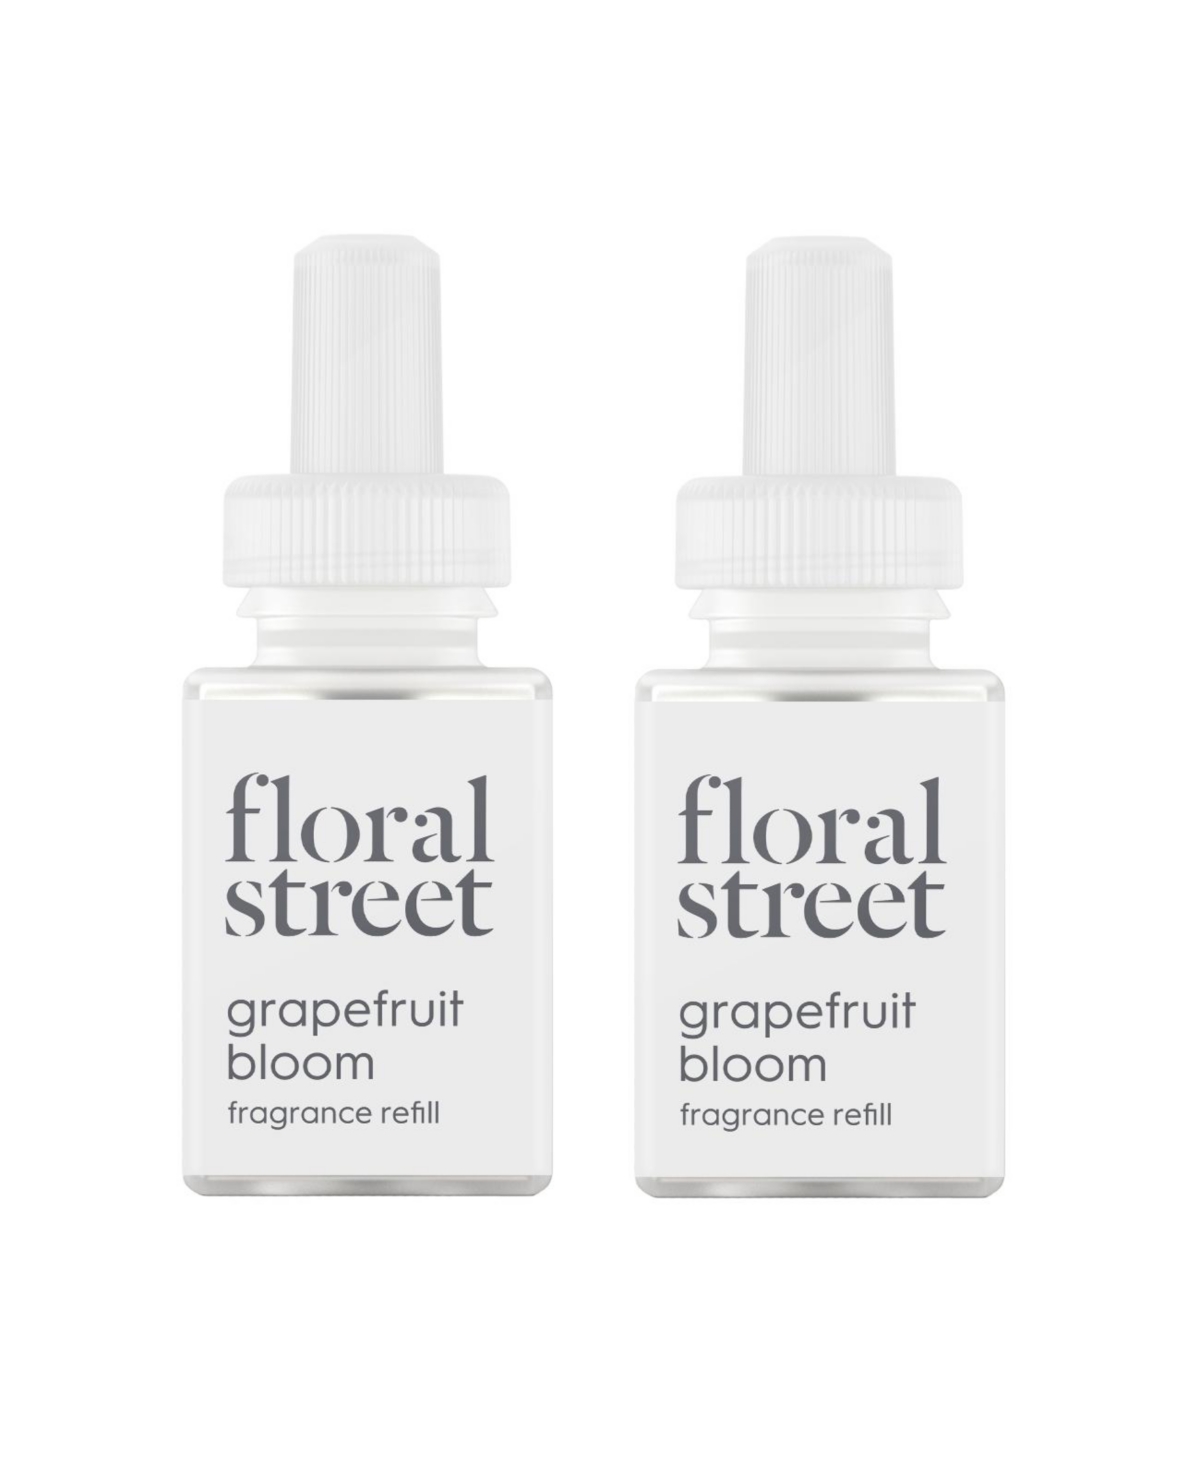 and Floral Street - Grapefruit Bloom - Fragrance for Smart Home Air Diffusers - Room Freshener - Aromatherapy Scents for Bedrooms & Living Rooms